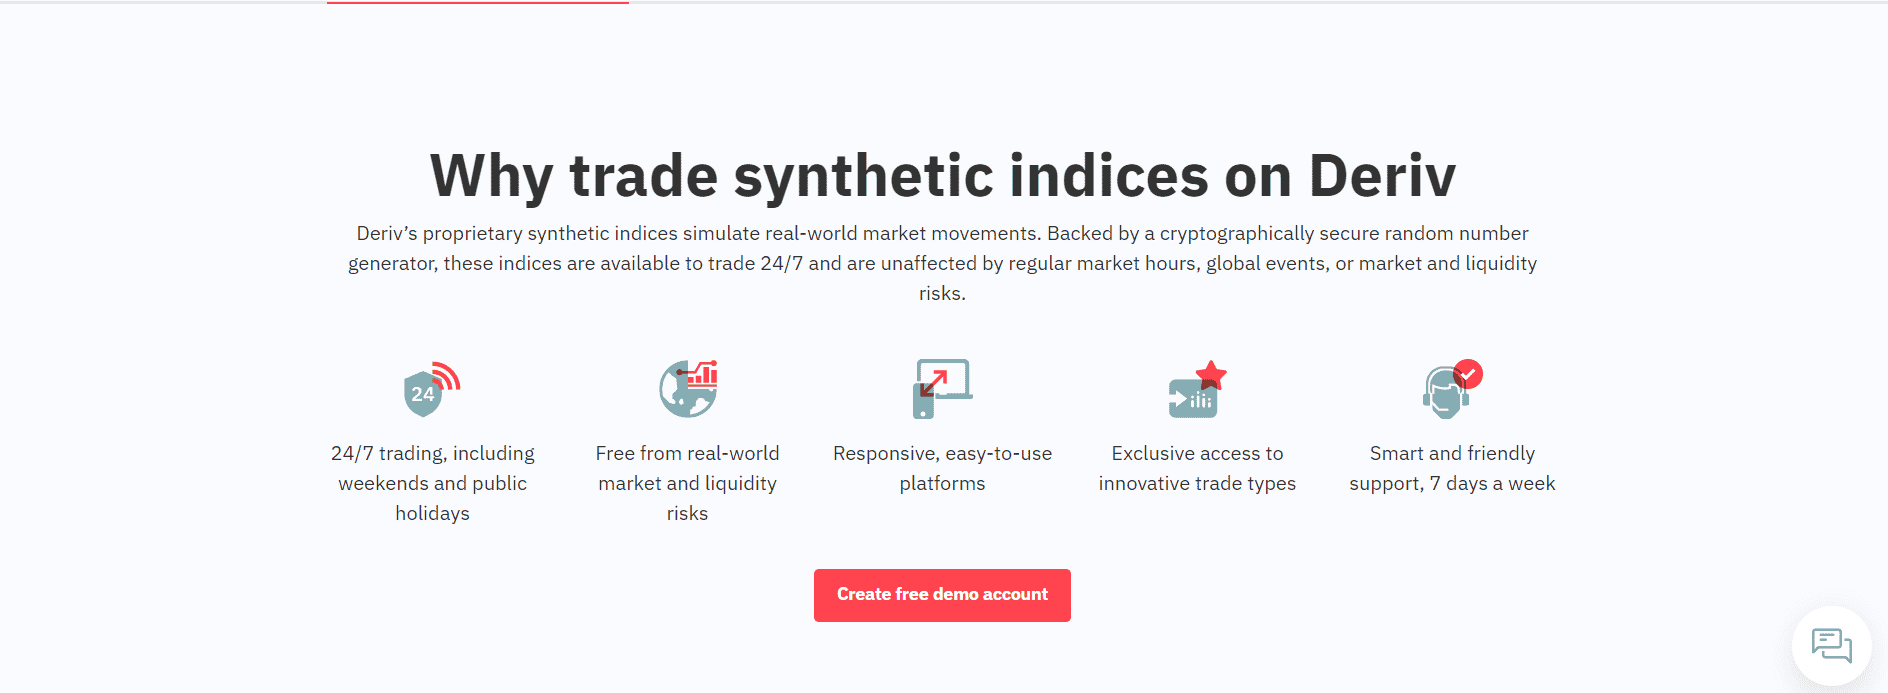 Synthetic Indices Advantages in Trading